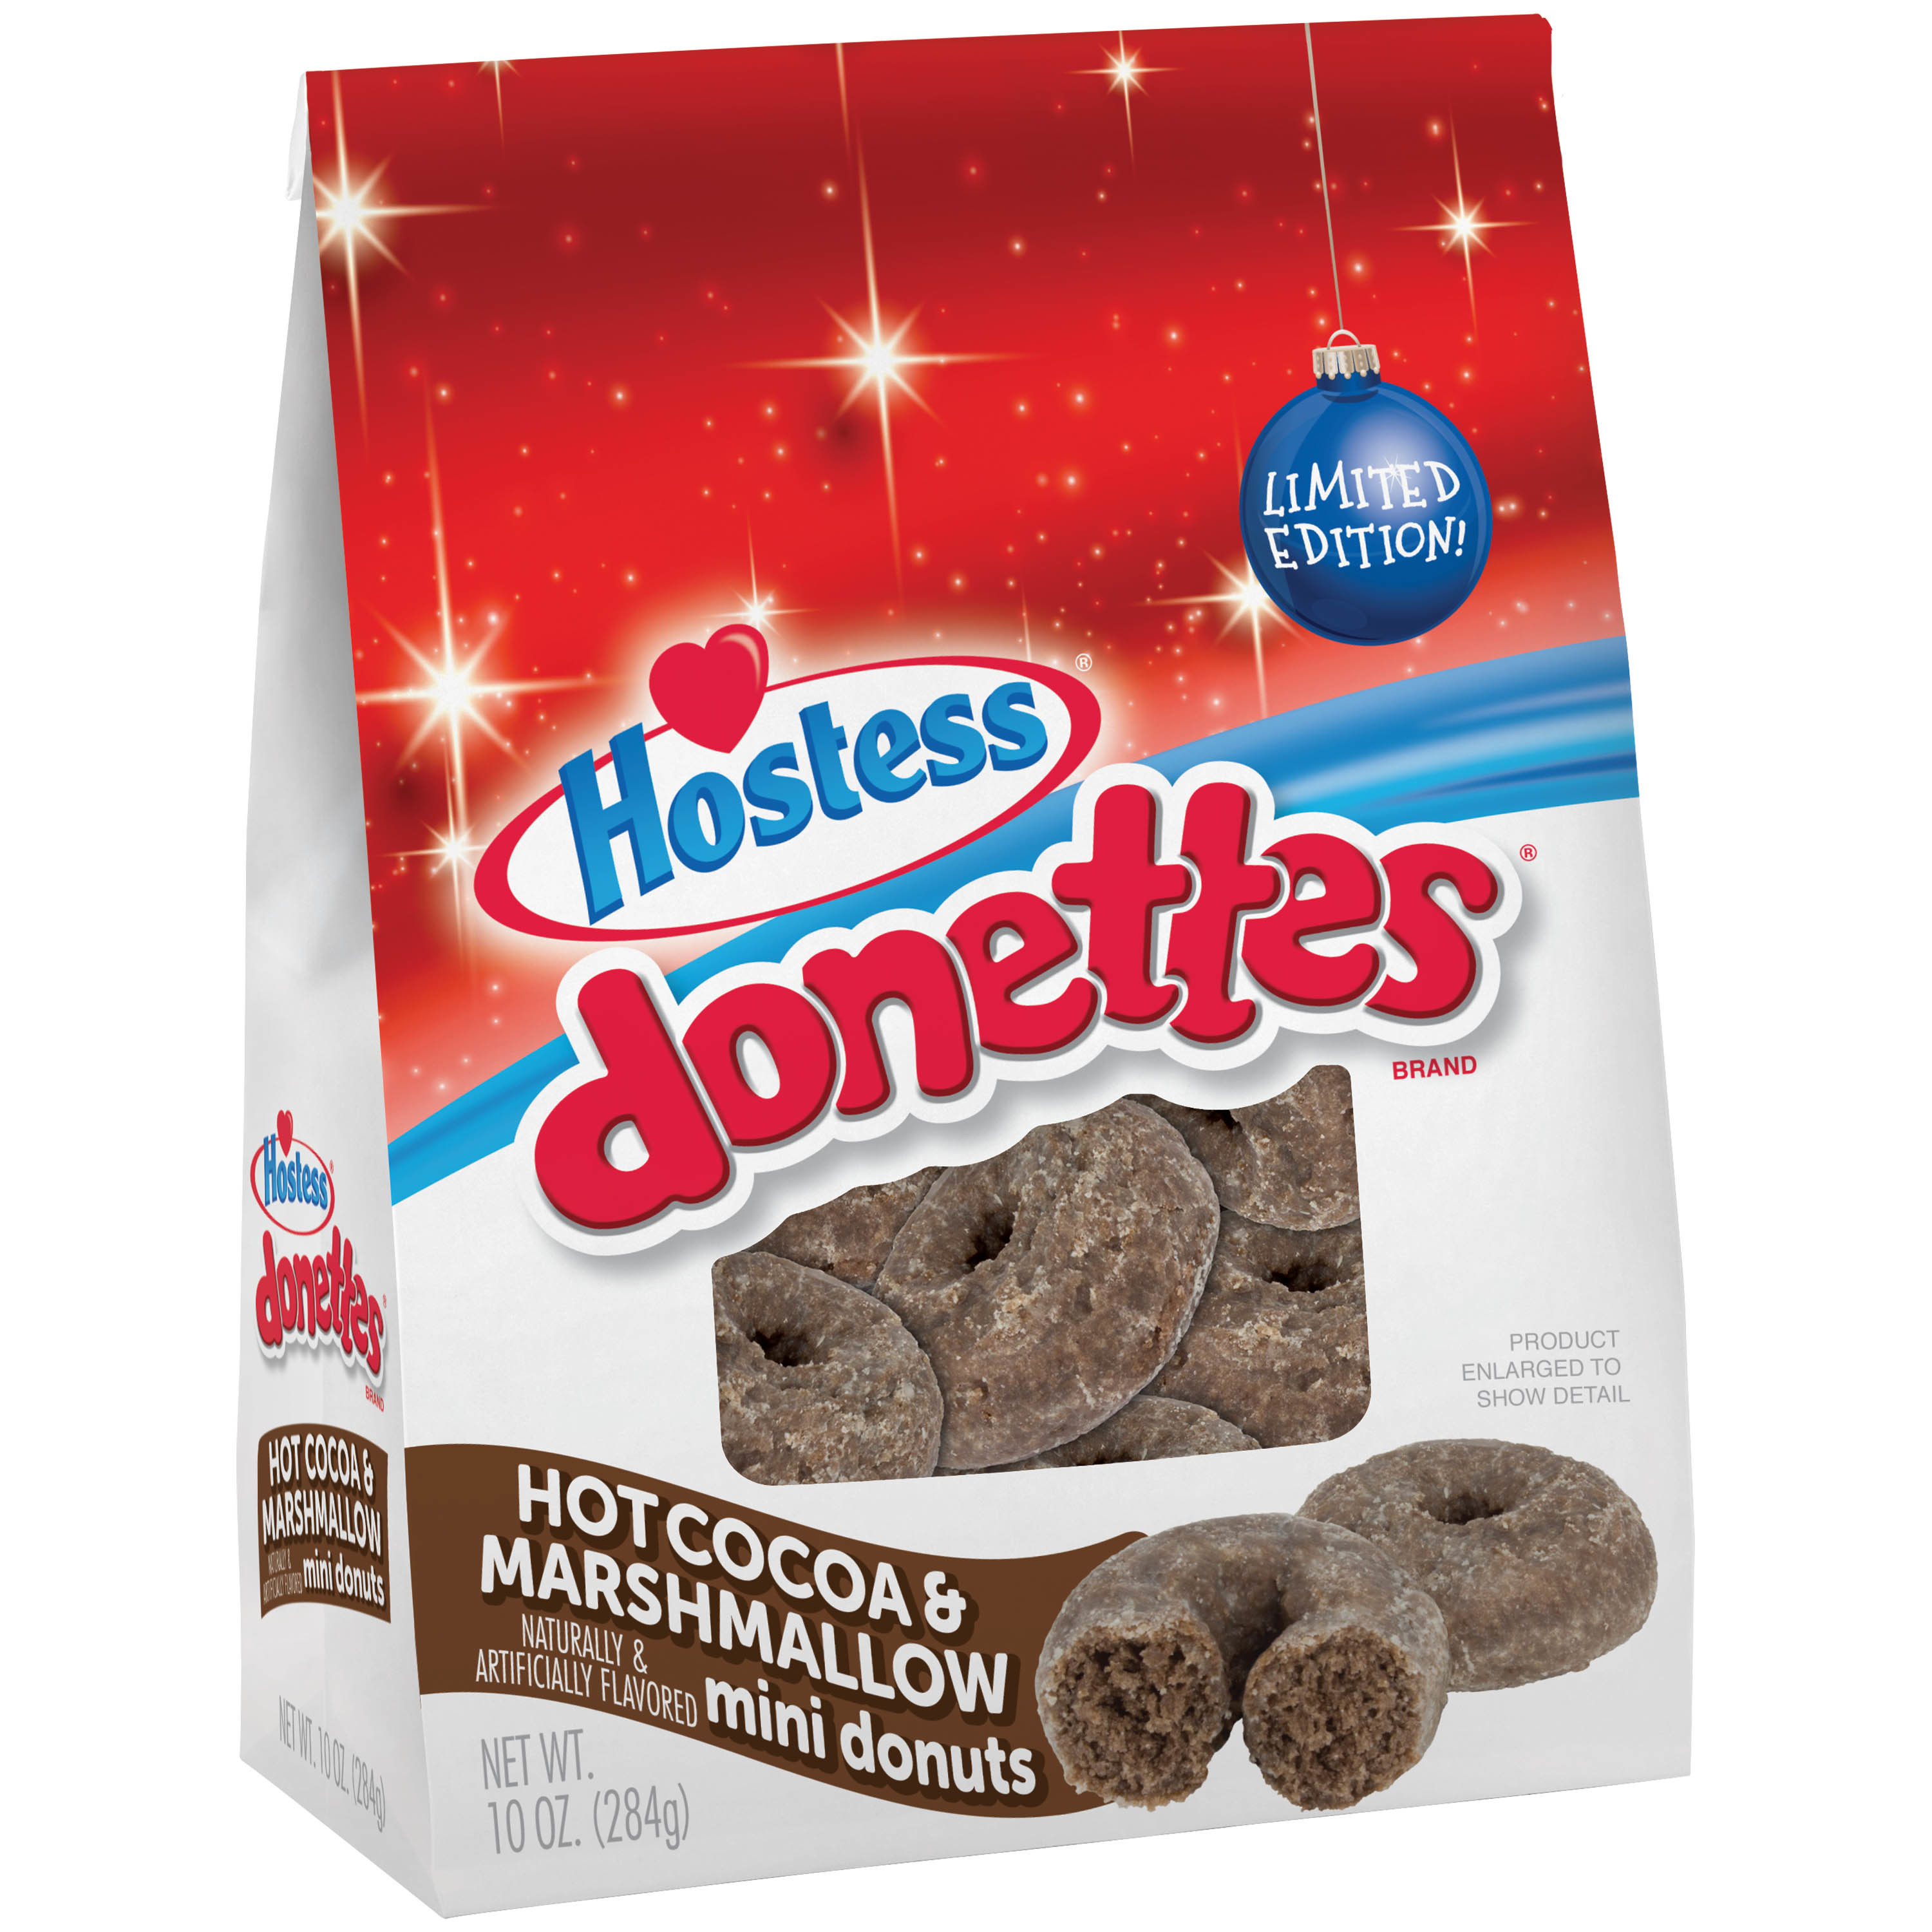 HOSTESS Hot Cocoa & Marshmallow Flavored DONETTES Donuts Bag, 10 oz - image 2 of 10